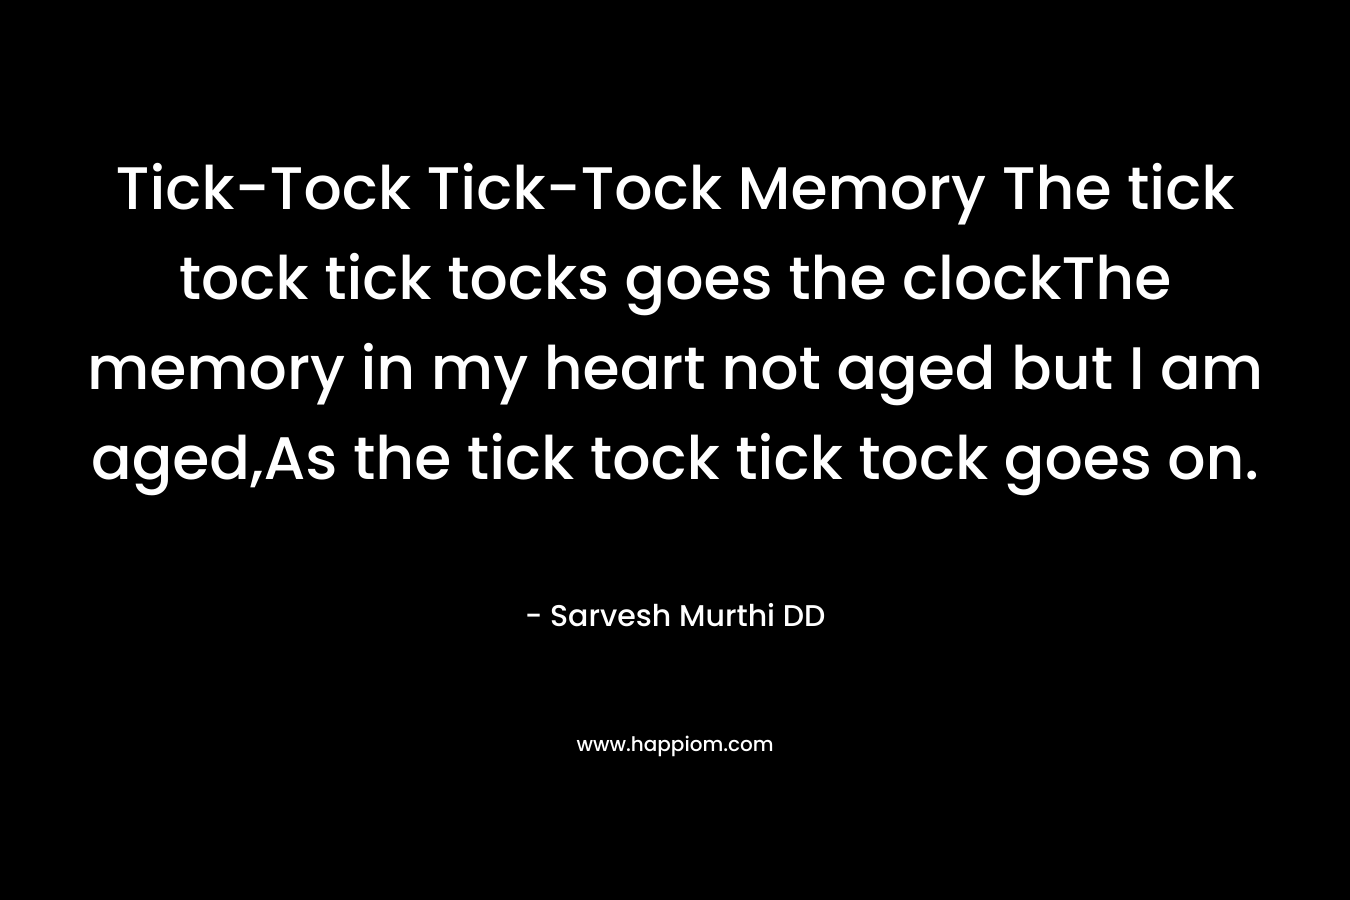 Tick-Tock Tick-Tock Memory The tick tock tick tocks goes the clockThe memory in my heart not aged but I am aged,As the tick tock tick tock goes on.